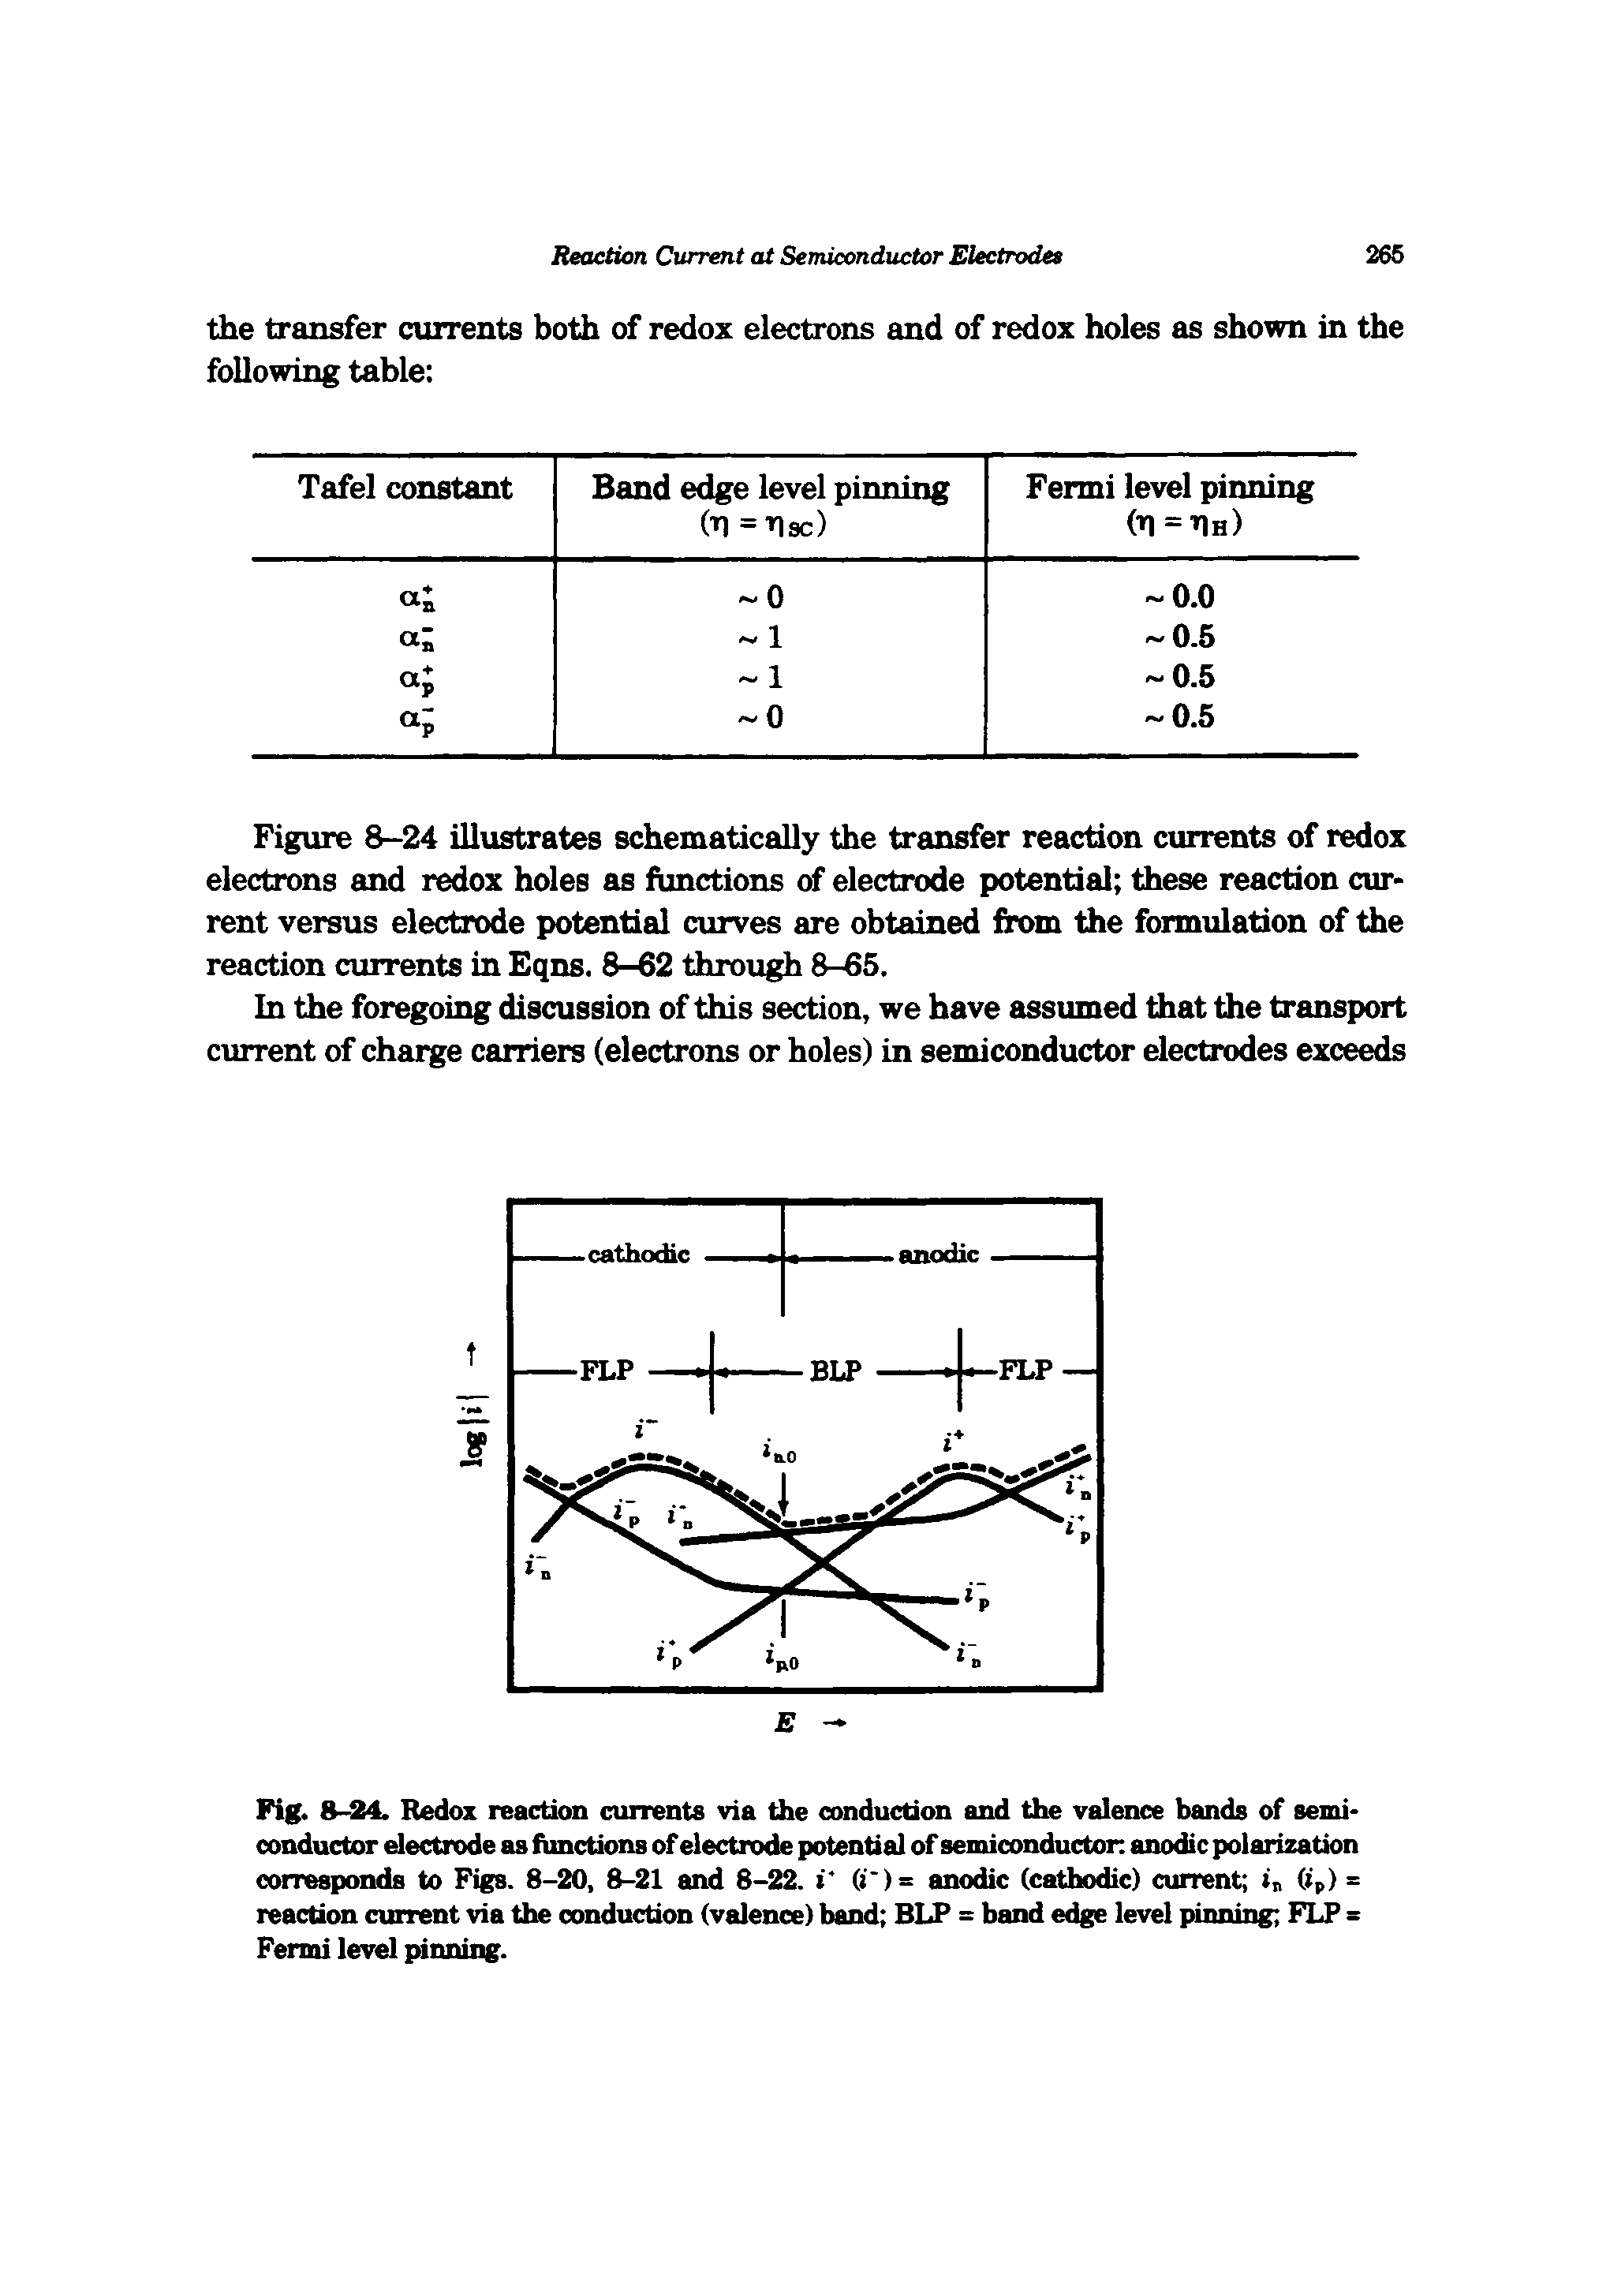 Fig. 8-24. Redox reaction currents via the conduction and the valence bands of semiconductor electrode as functions of electrode potential of semiconductor anodic polarization corresponds to Figs. 8-20, 8-21 and 8-22. i (i )= anodic (cathodic) current in (ip) = reaction crnrent via the conduction (valence) band BLP = band edge level pinning FLP = Fermi level pinning.